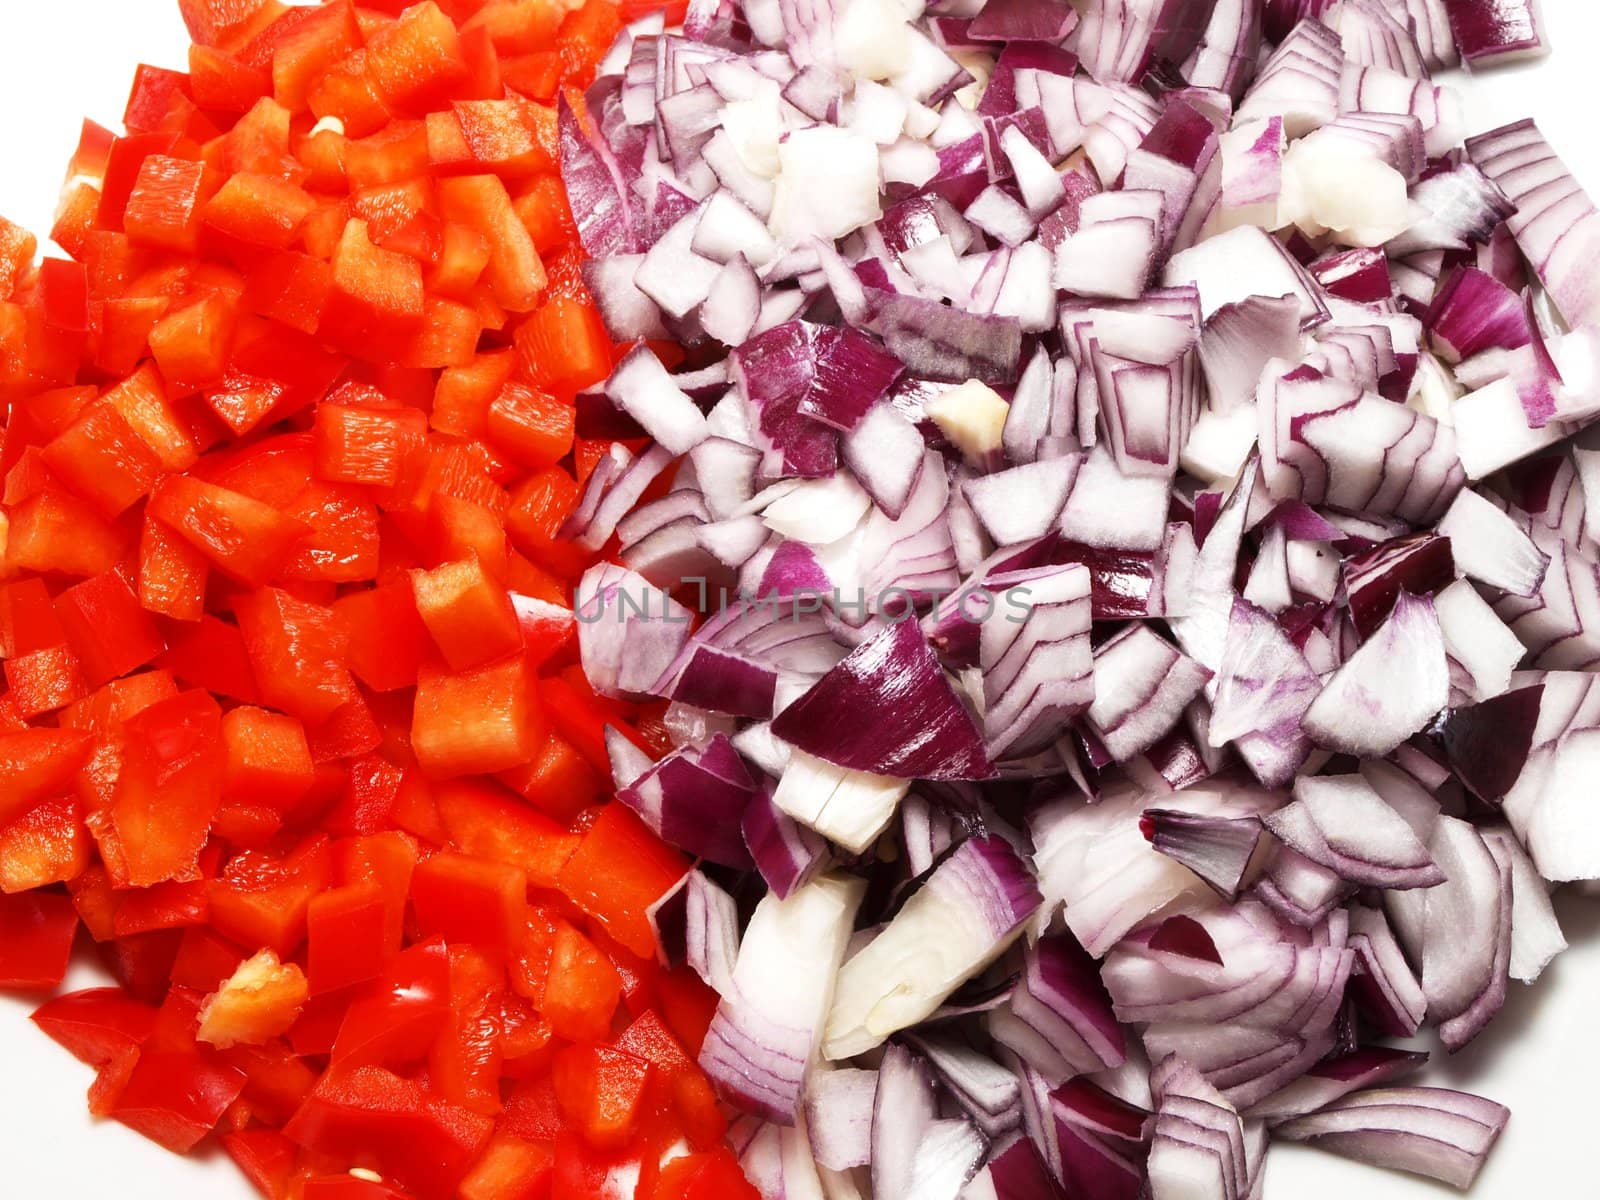 Red pepper and red onion by Arvebettum